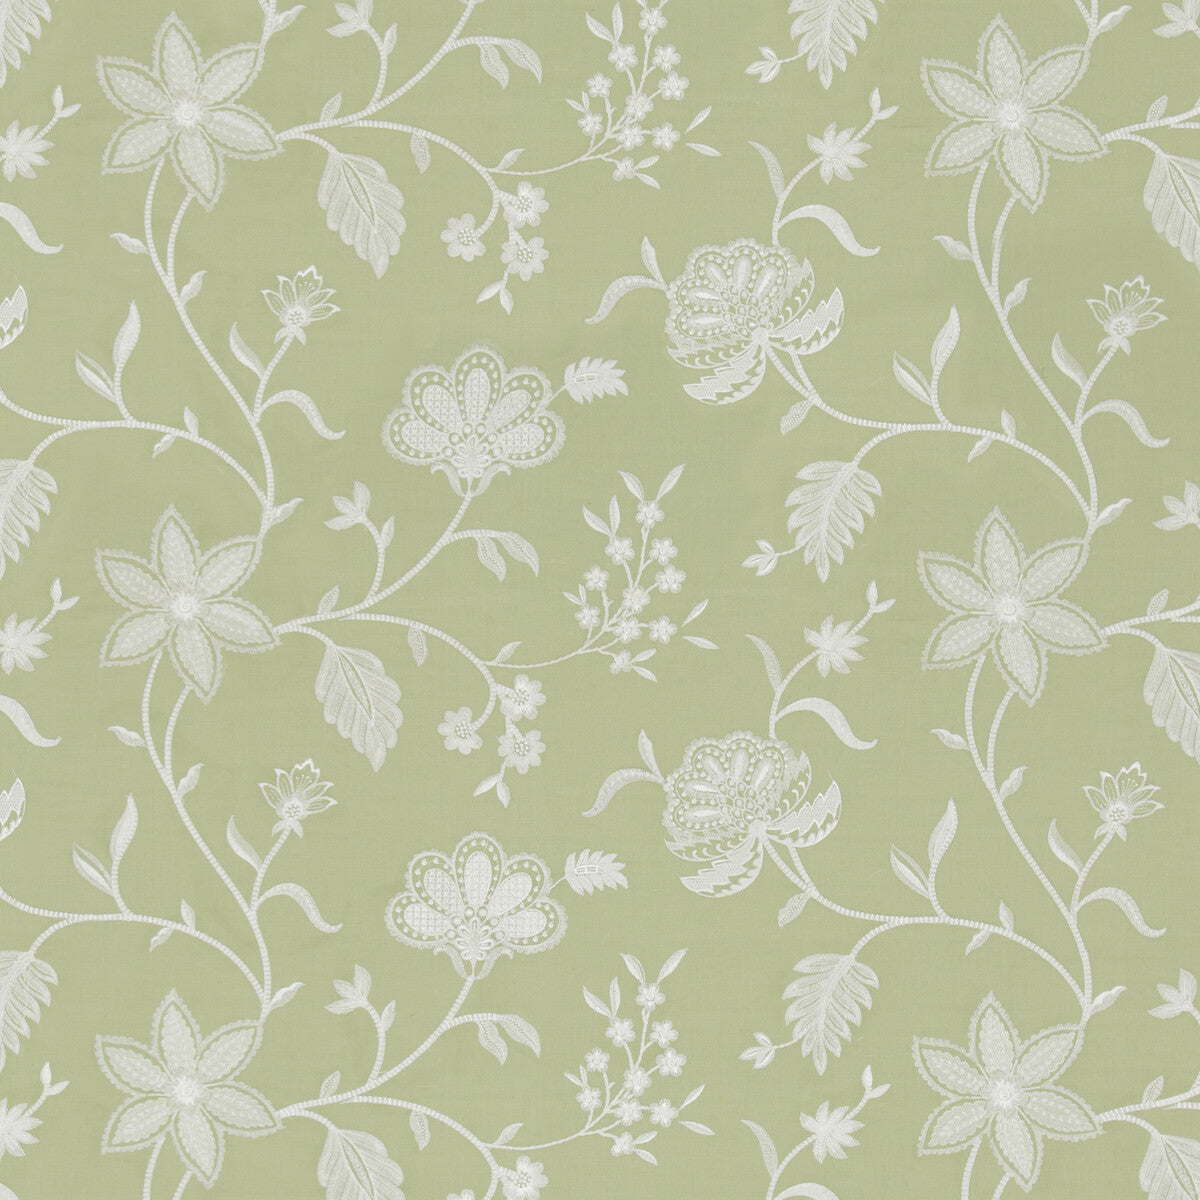 Petherton fabric in green color - pattern PF50504.735.0 - by Baker Lifestyle in the Bridport collection